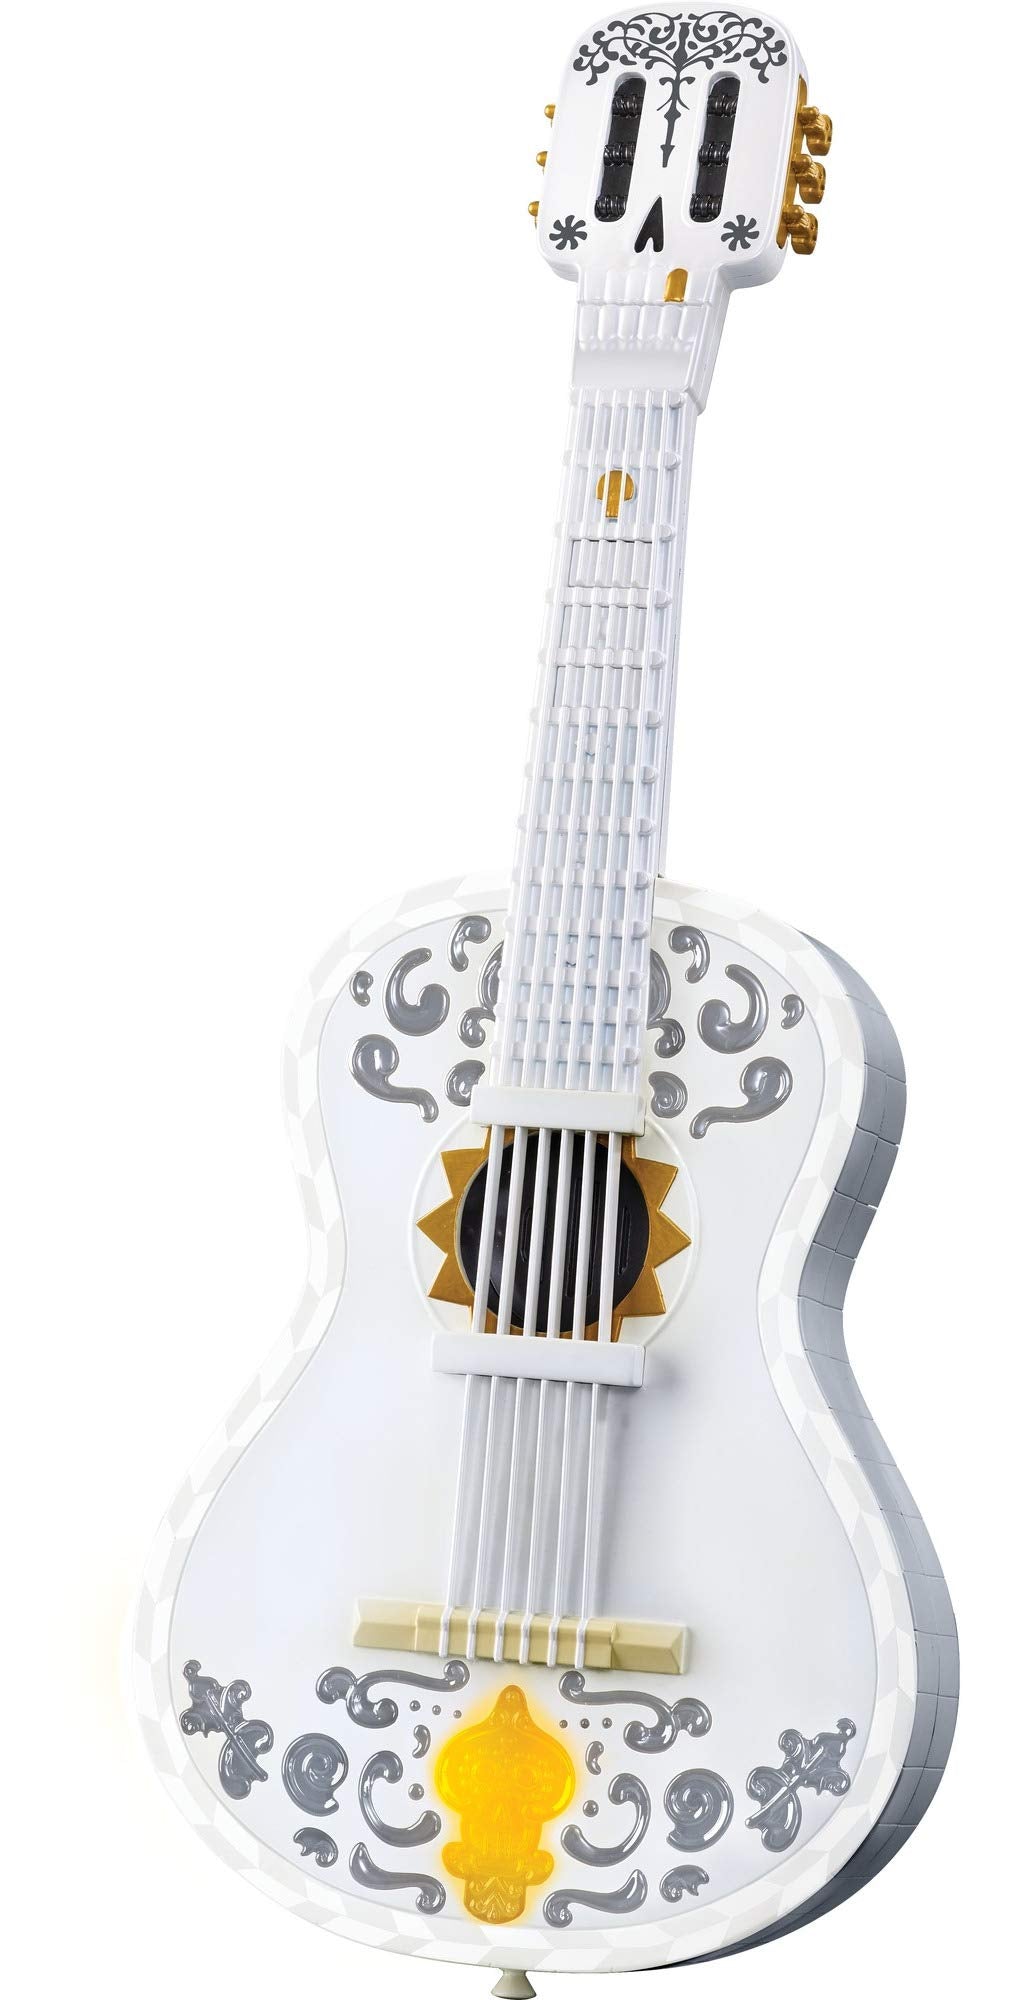 Disney/Pixar Coco Guitar, Playable Musical Toy with Chord Chart, Approx 25-in (63.5-cm) Long for Kids Ages 3 Years Old & Up [Amazon Exclusive]